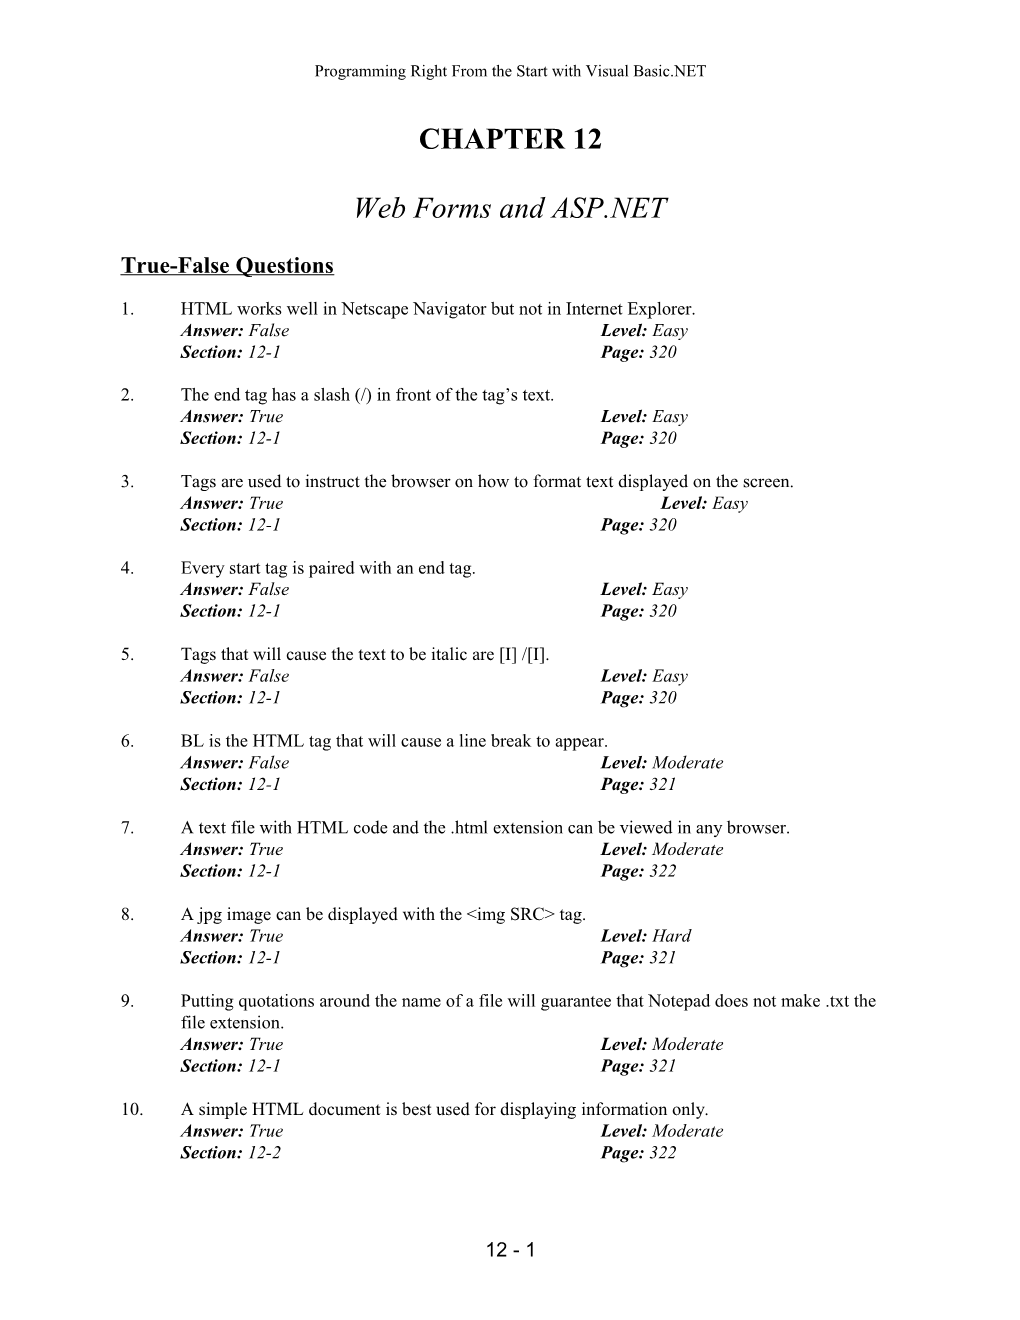 Chapter 12 Web Forms and ASP.NET